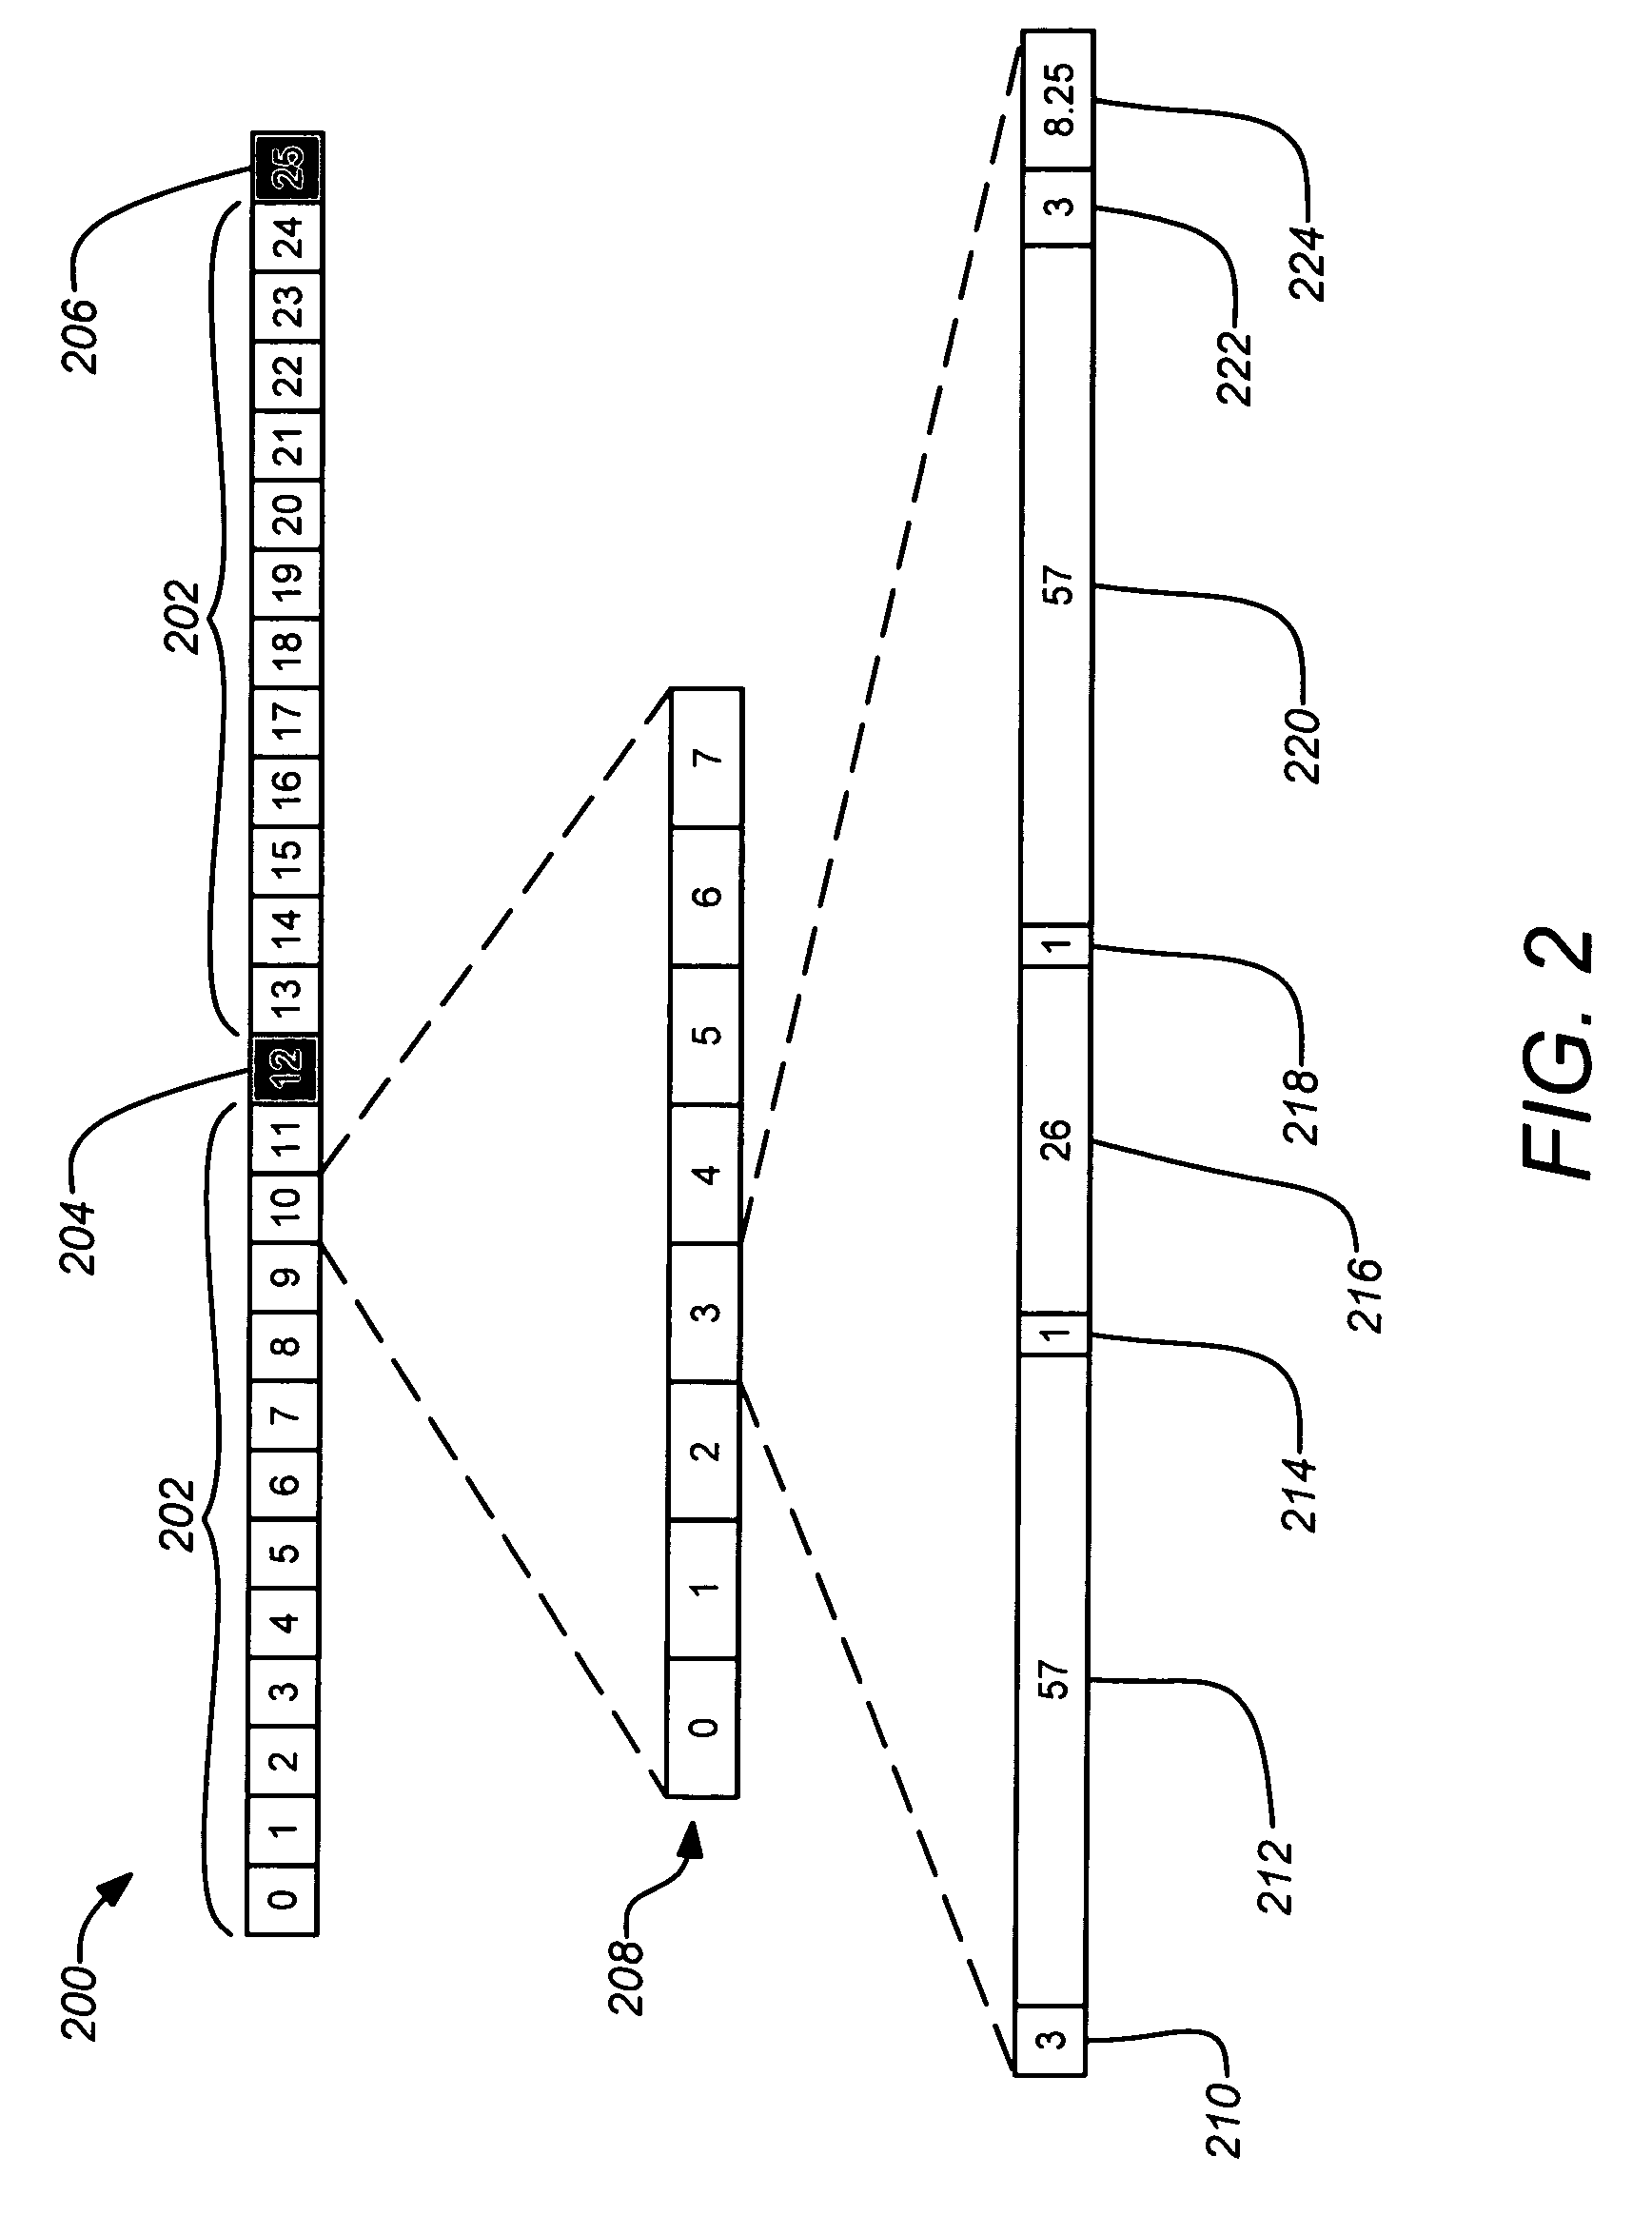 Method to efficiently generate the row and column index for half rate interleaver in GSM